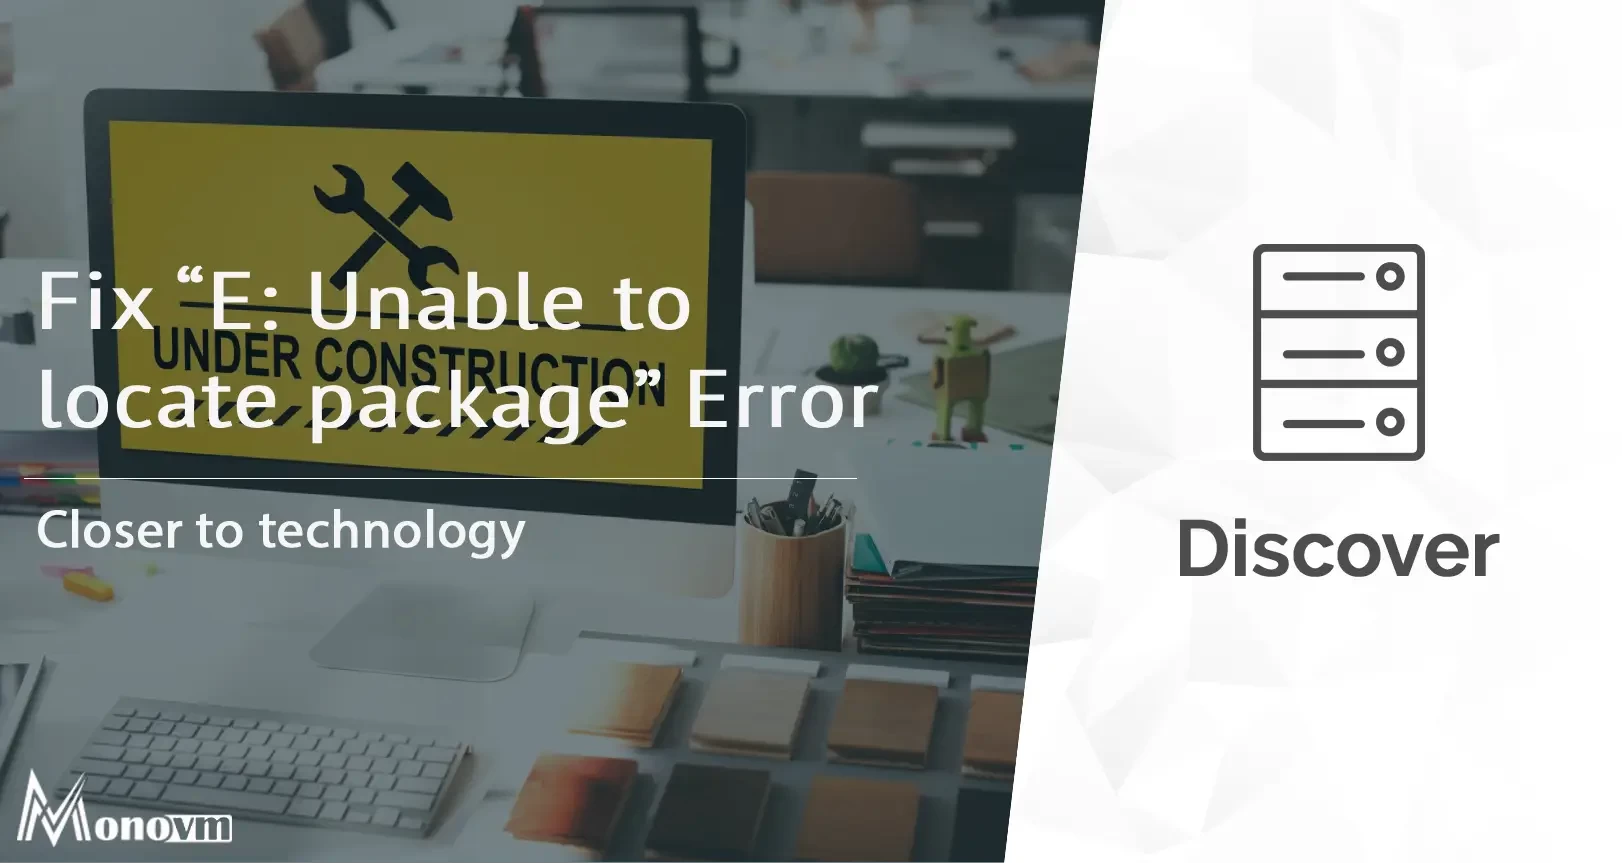 6 Ways to Fix “E: Unable to locate package” Error on Ubuntu